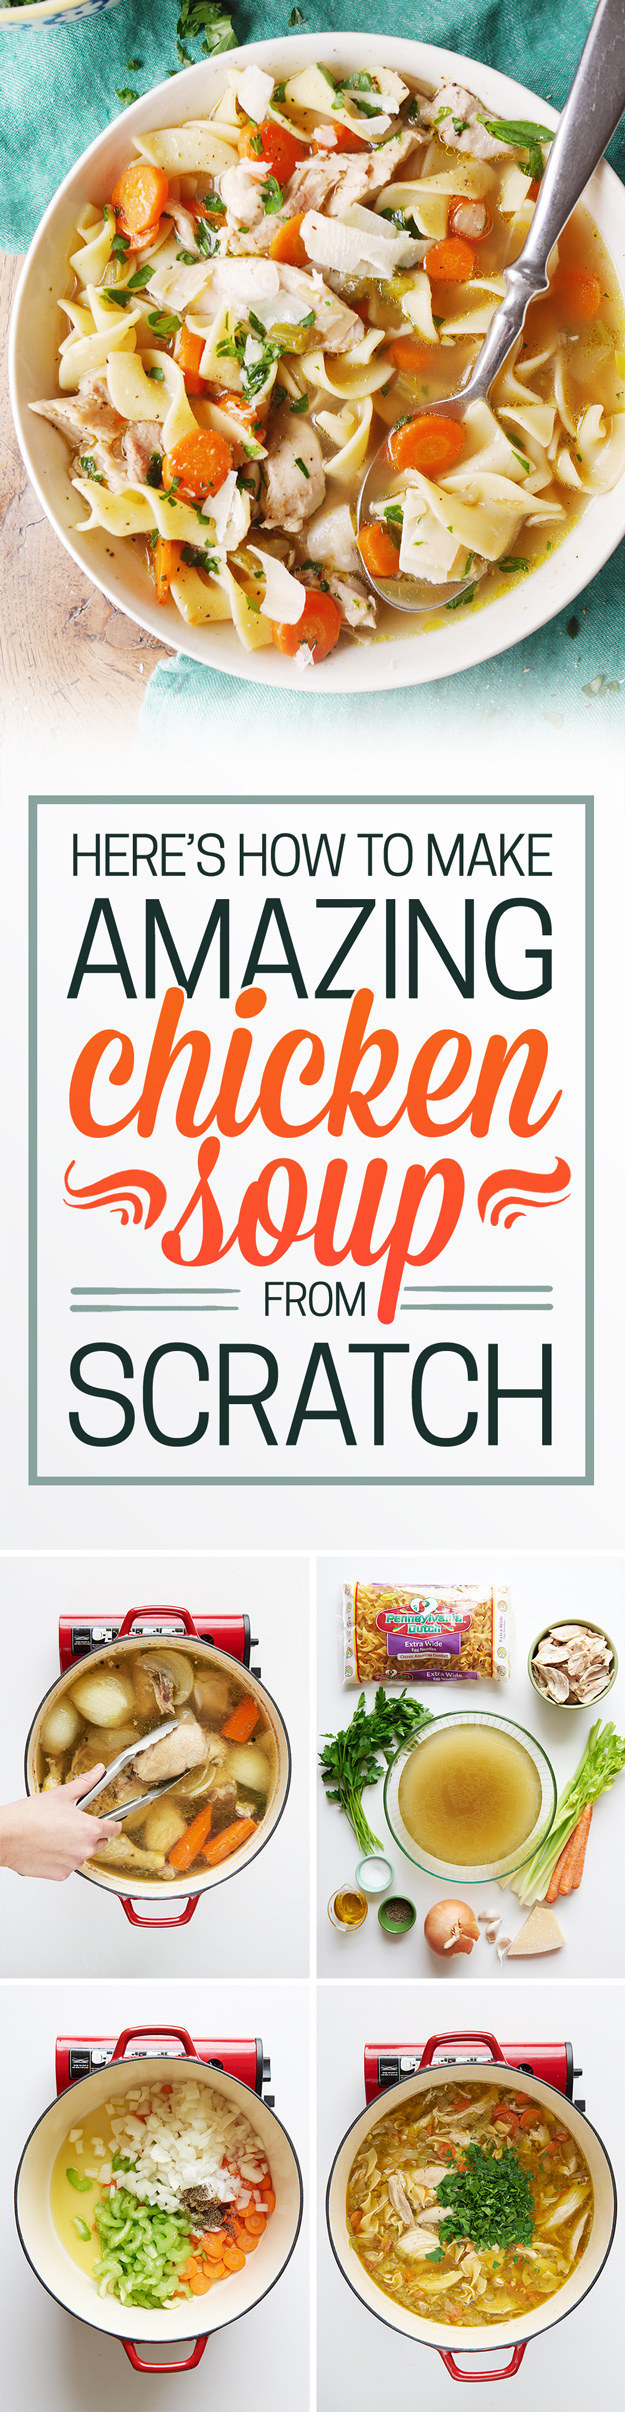 Have you ever wondered why your mom's homemade chicken soup tasted so delicious? I hate to break it to ya, but love wasn't the ~only~ reason it tasted so good. It was FROM SCRATCH.